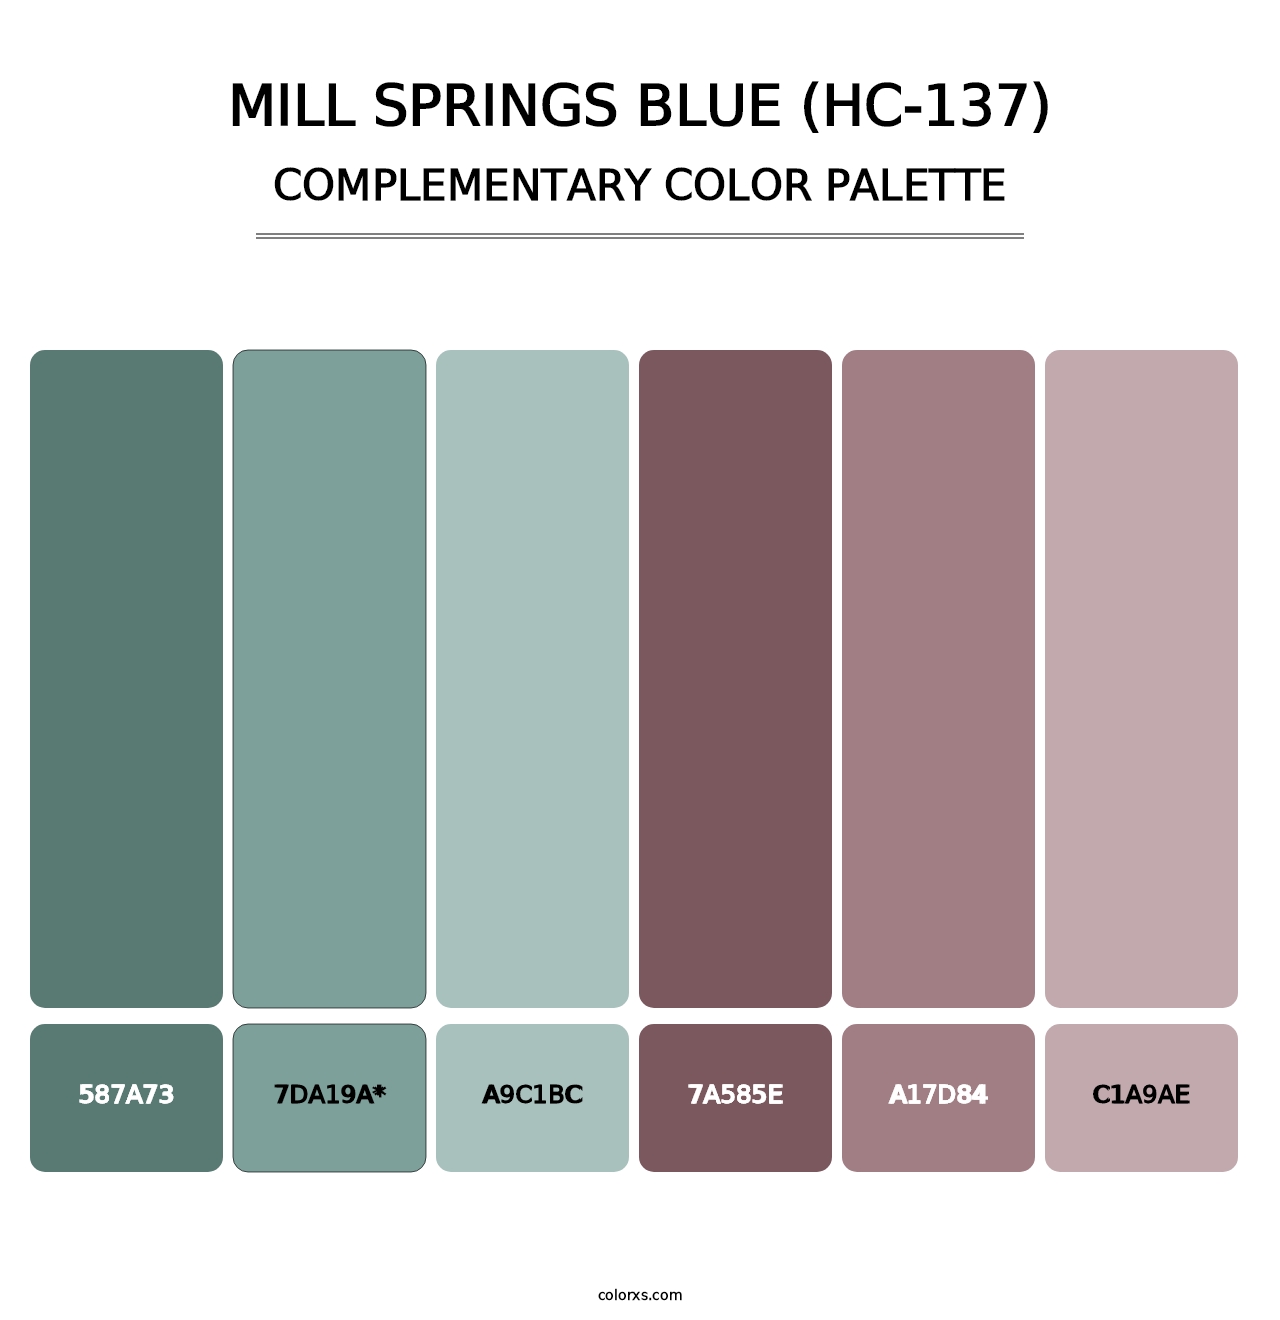 Mill Springs Blue (HC-137) - Complementary Color Palette